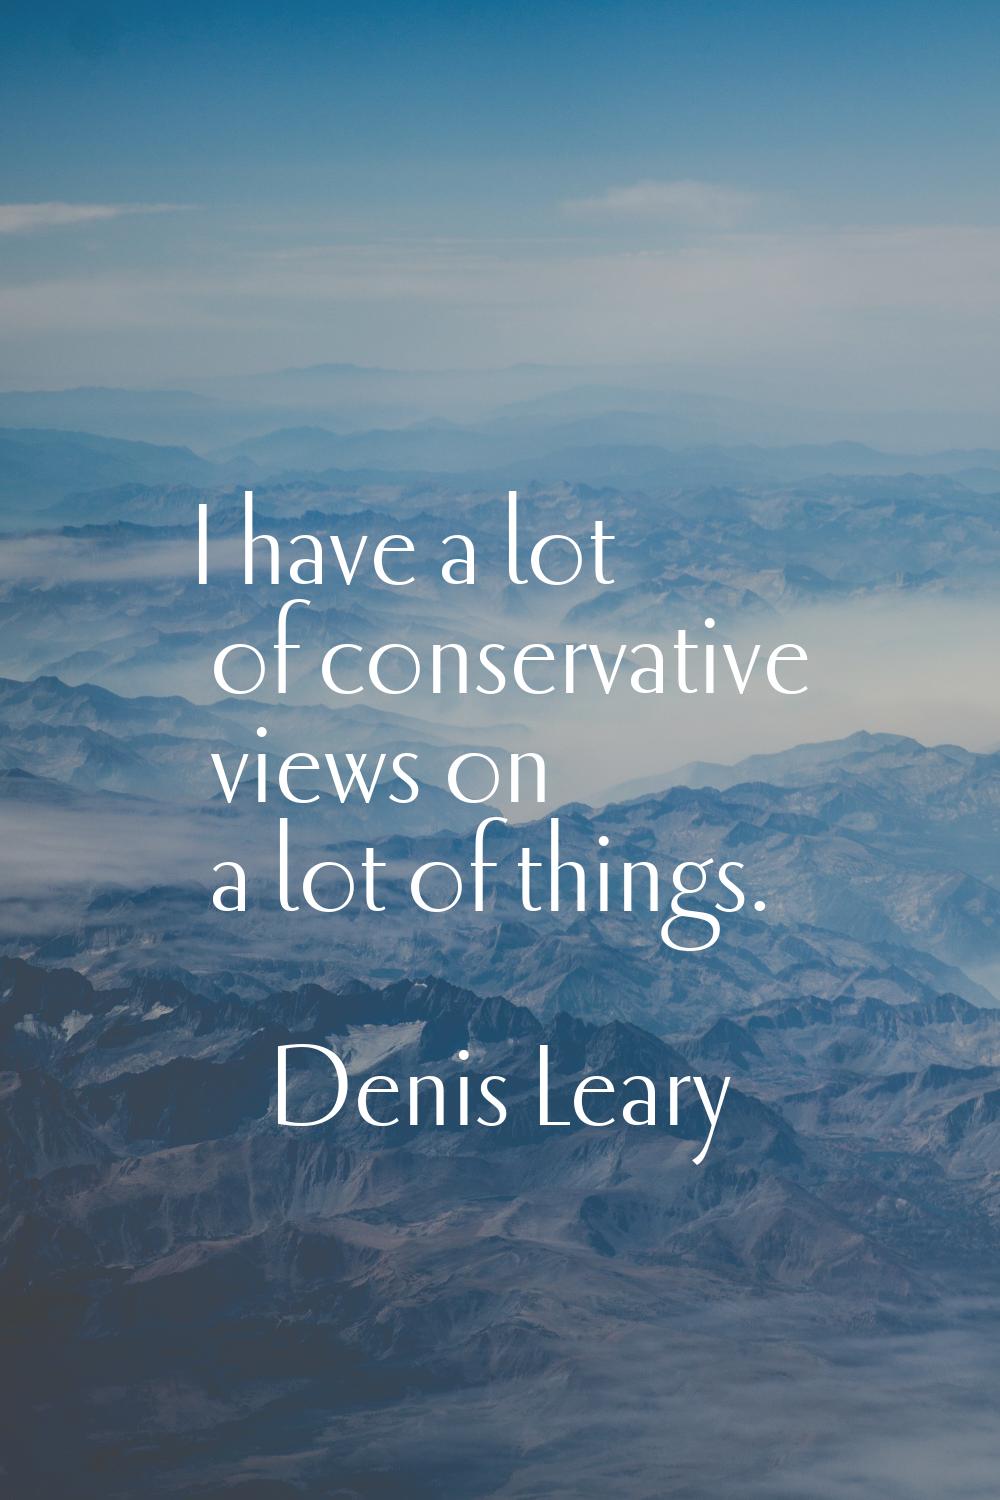 I have a lot of conservative views on a lot of things.